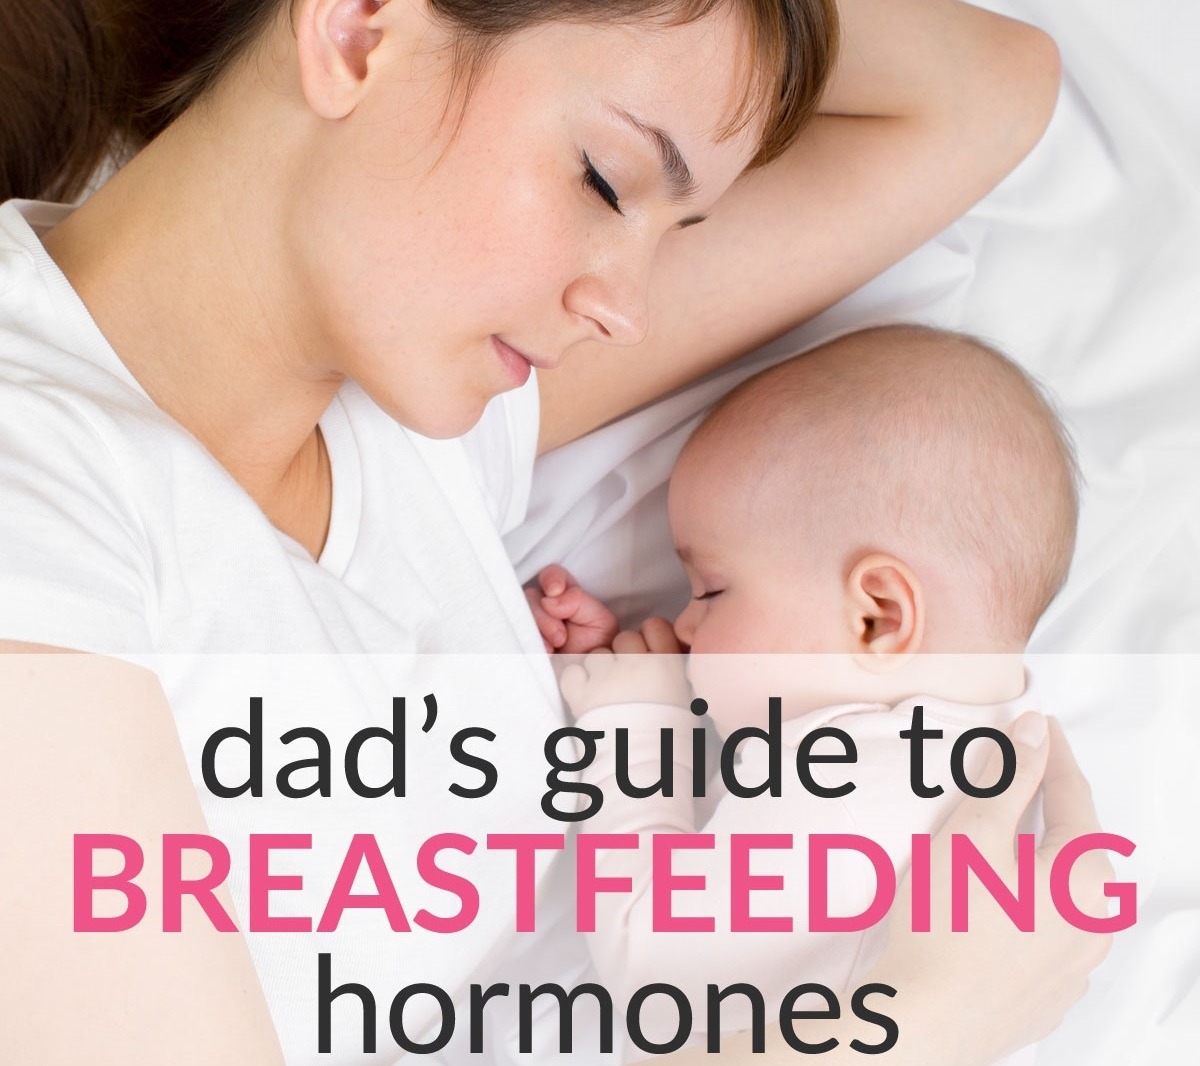 Dad Guide to Breastfeeding Hormones (Where Did My Wife Go?!)